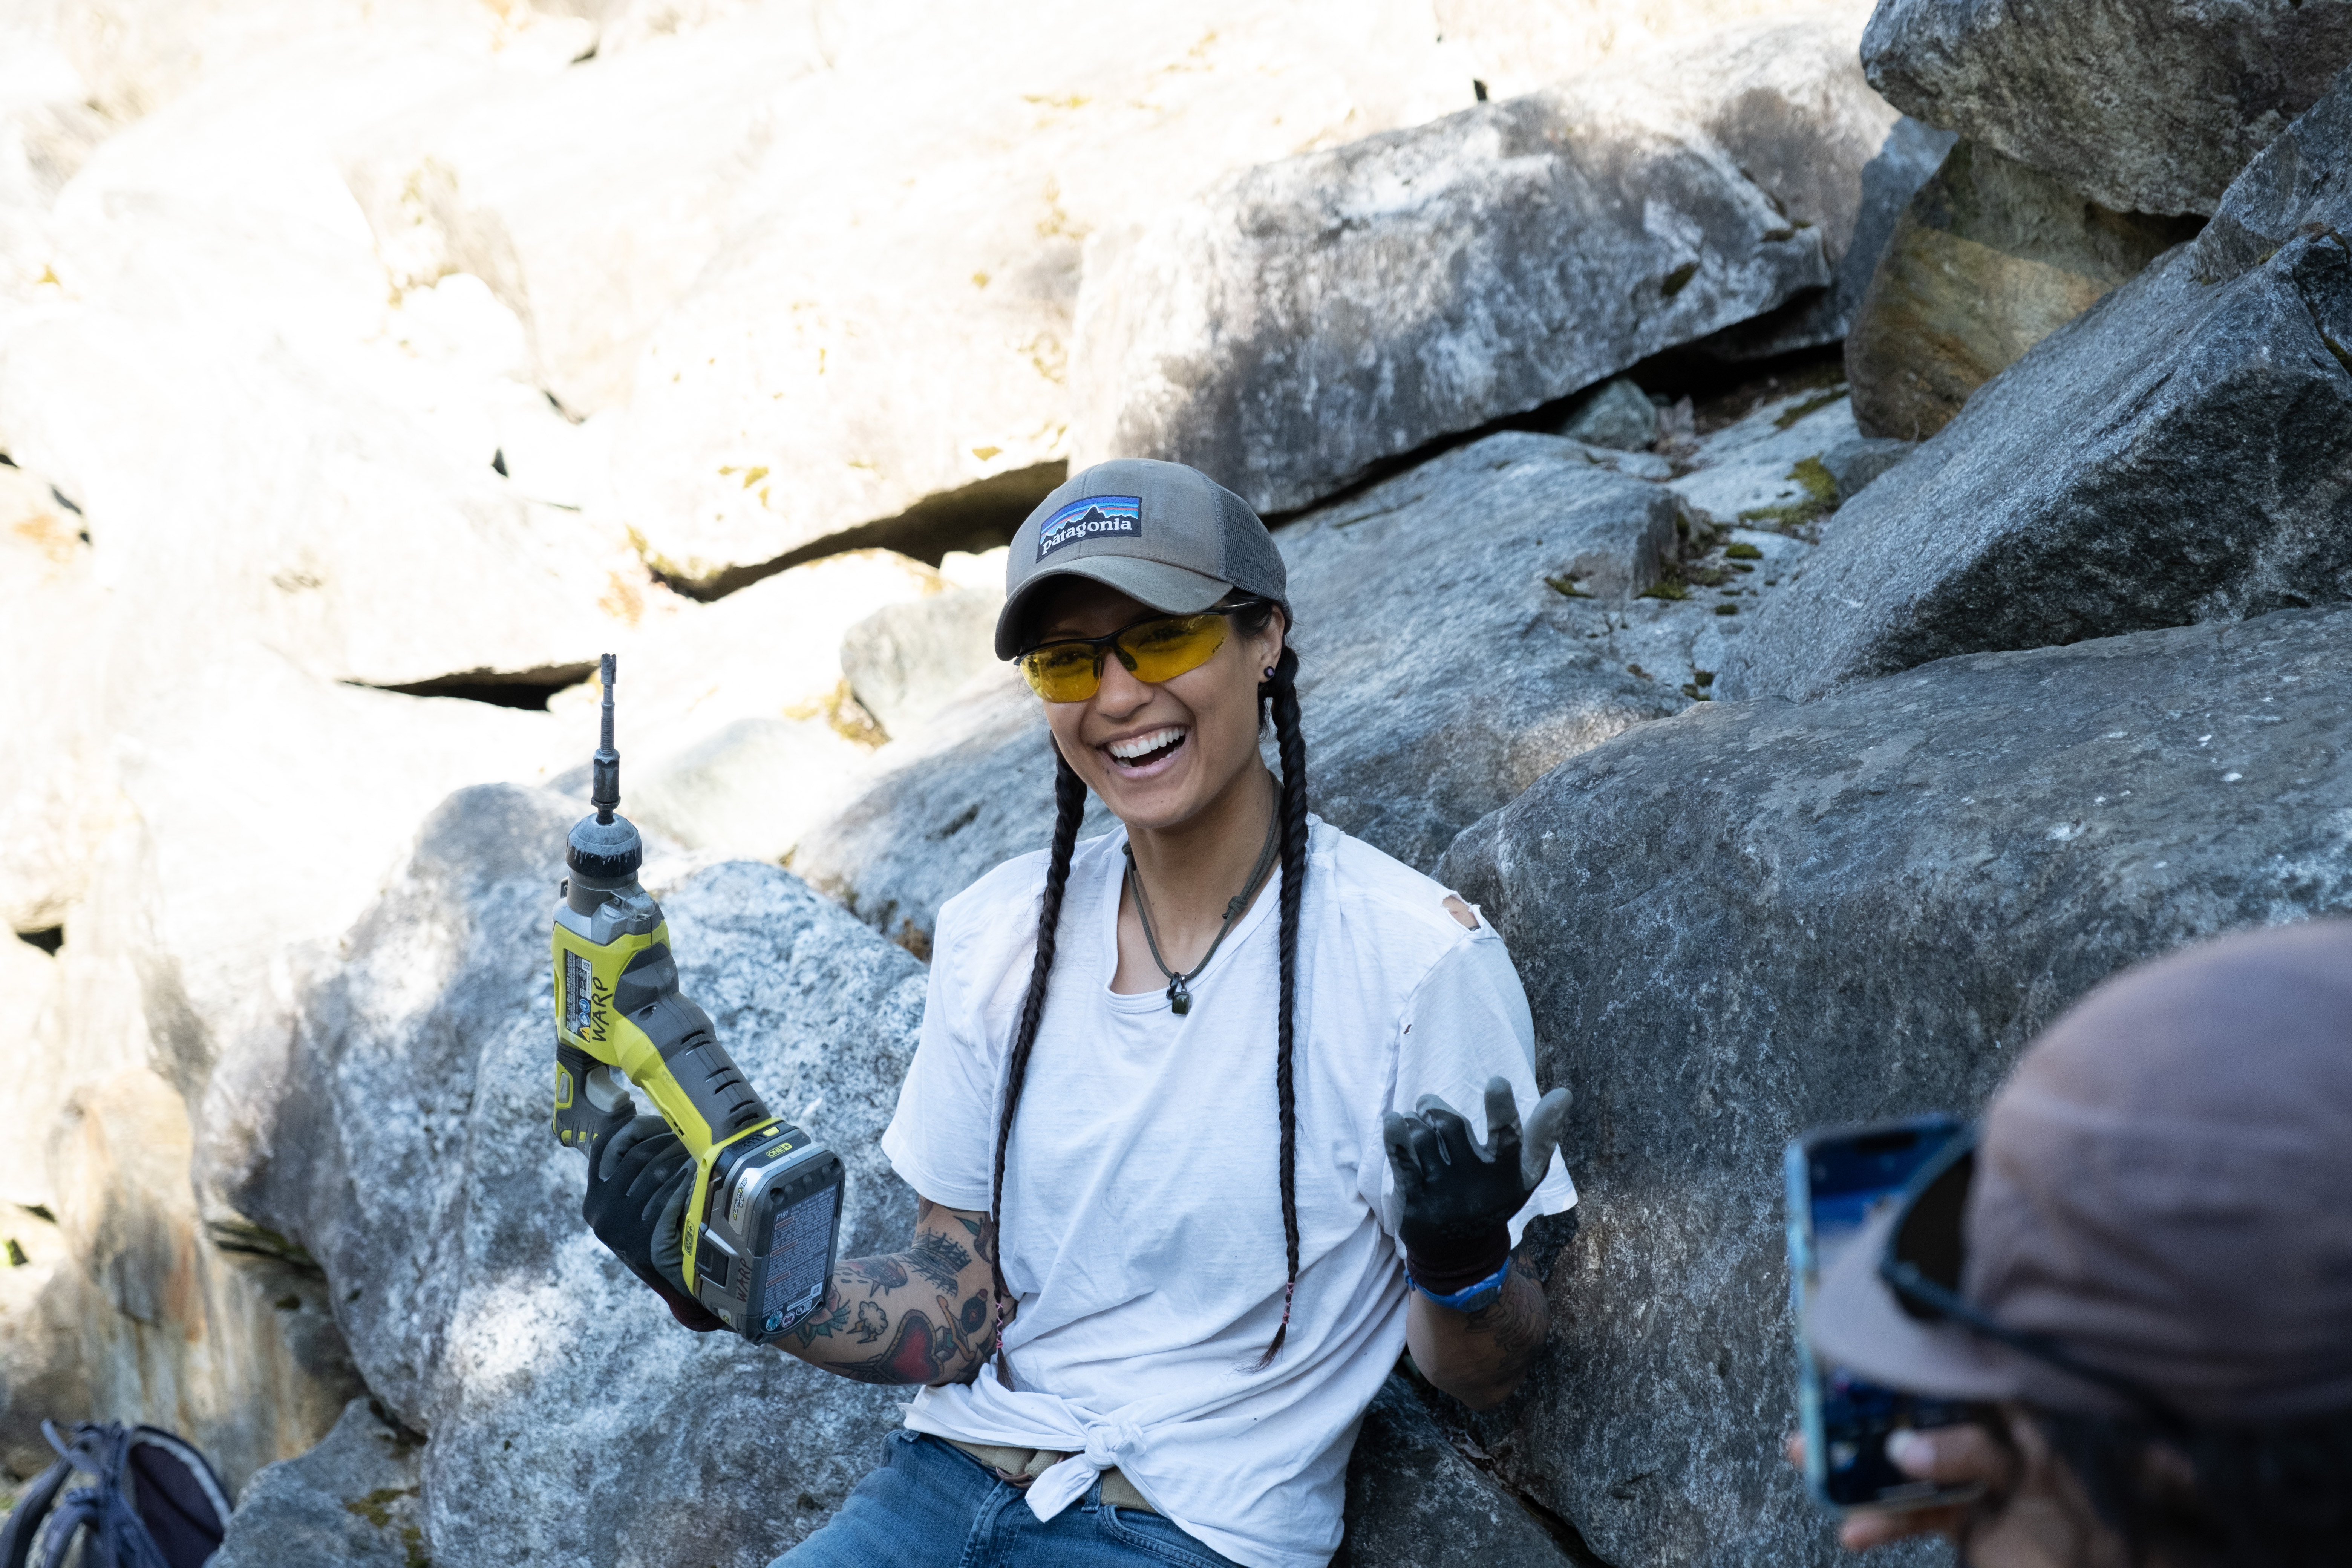 Alicia sitting on a rock smiling and holding a drill